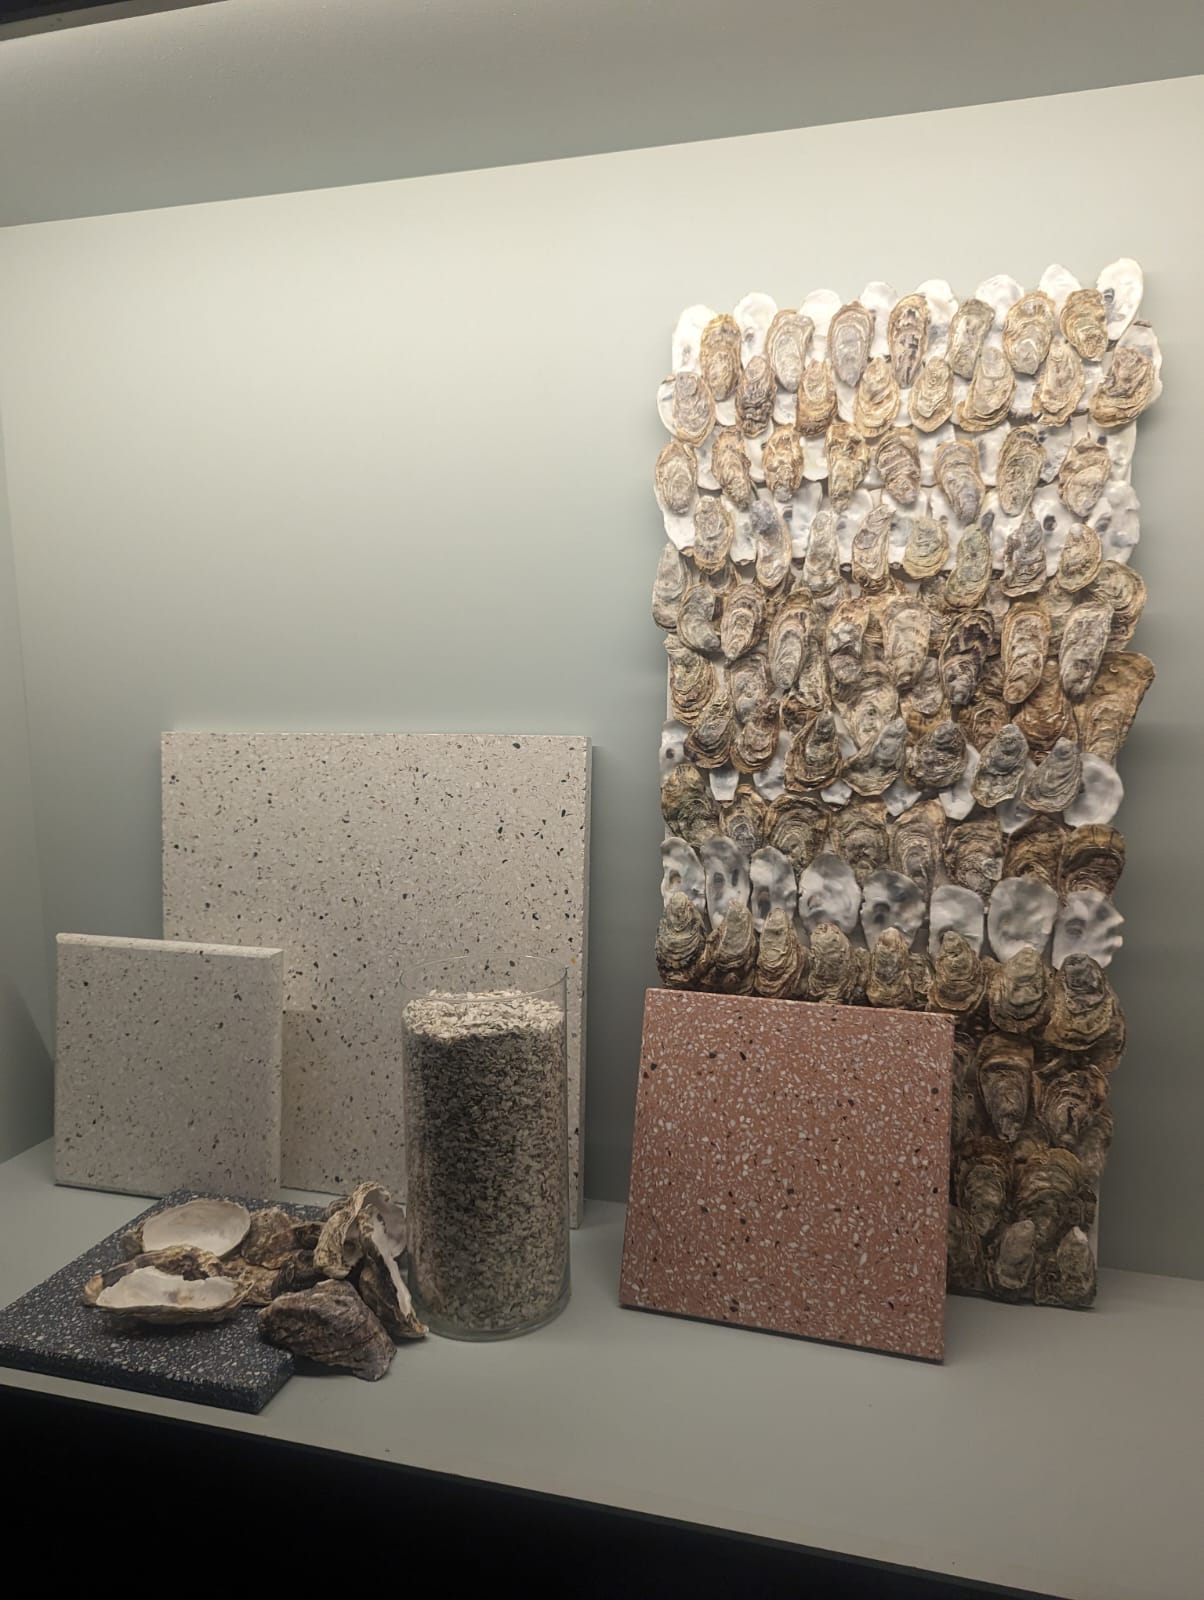 Products at Maison&Objet displaying the Textural Opulence trend